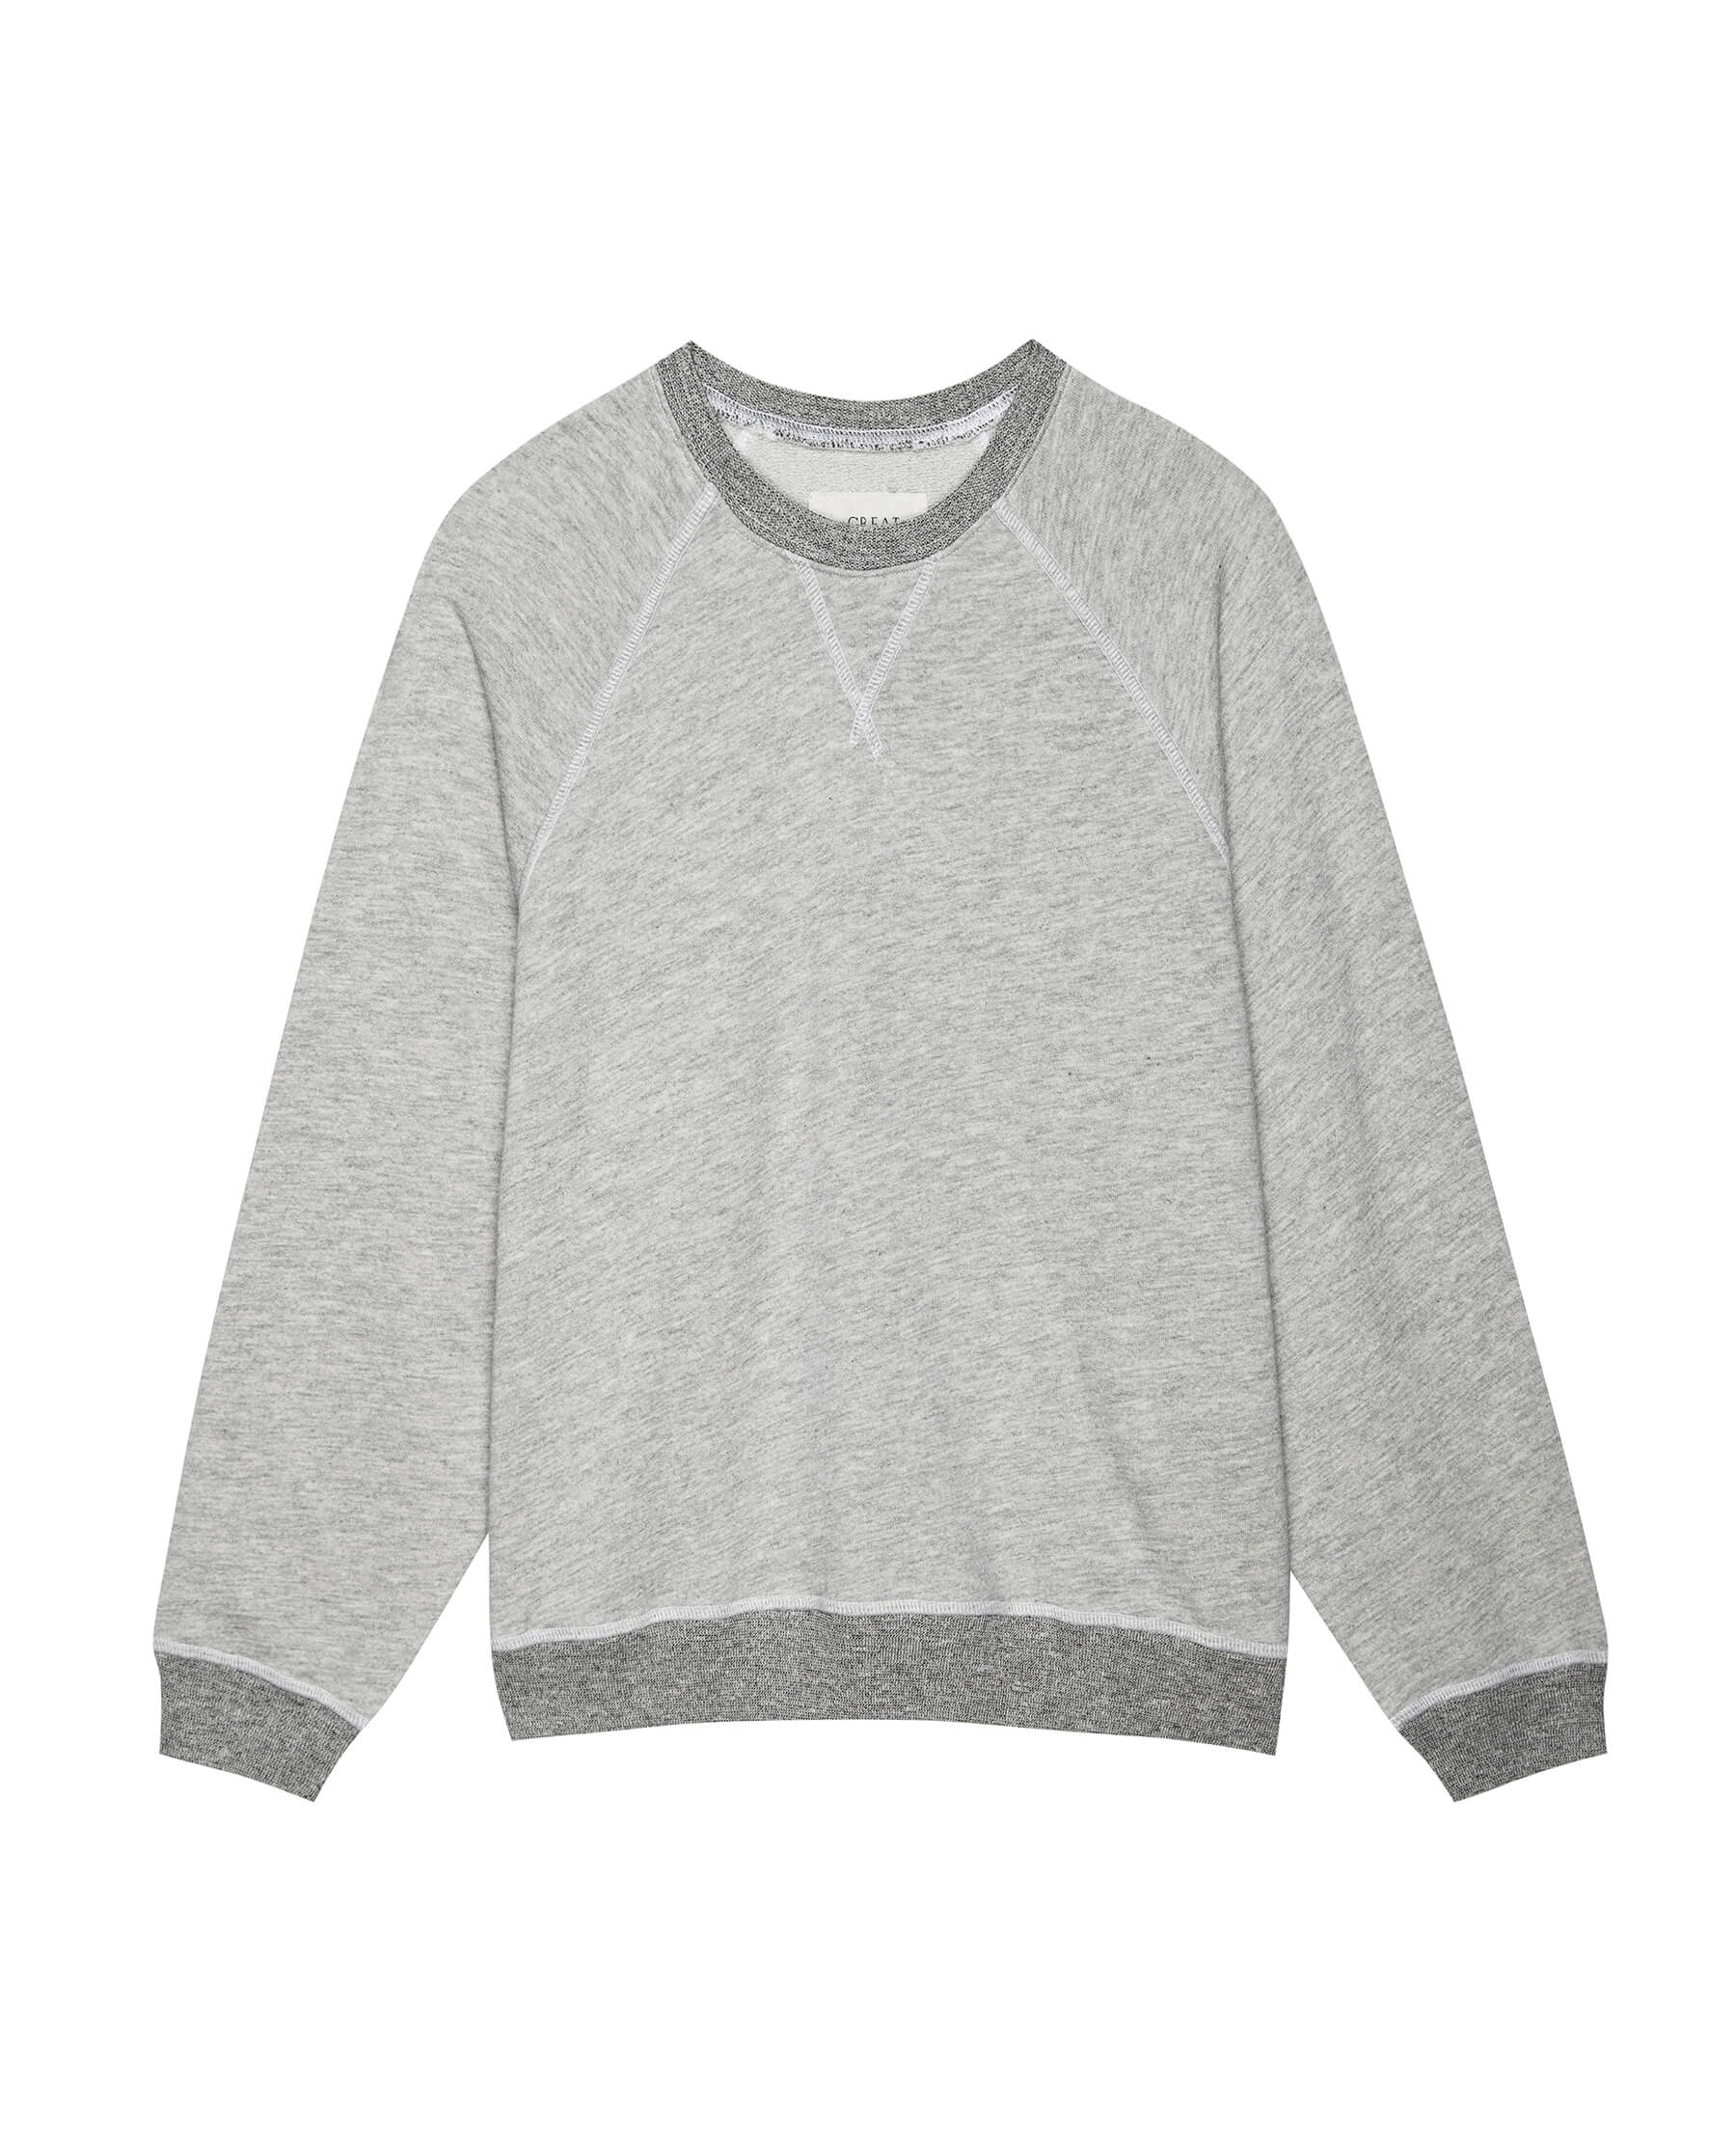 The Slouch Sweatshirt. Solid -- Soft Heather Grey